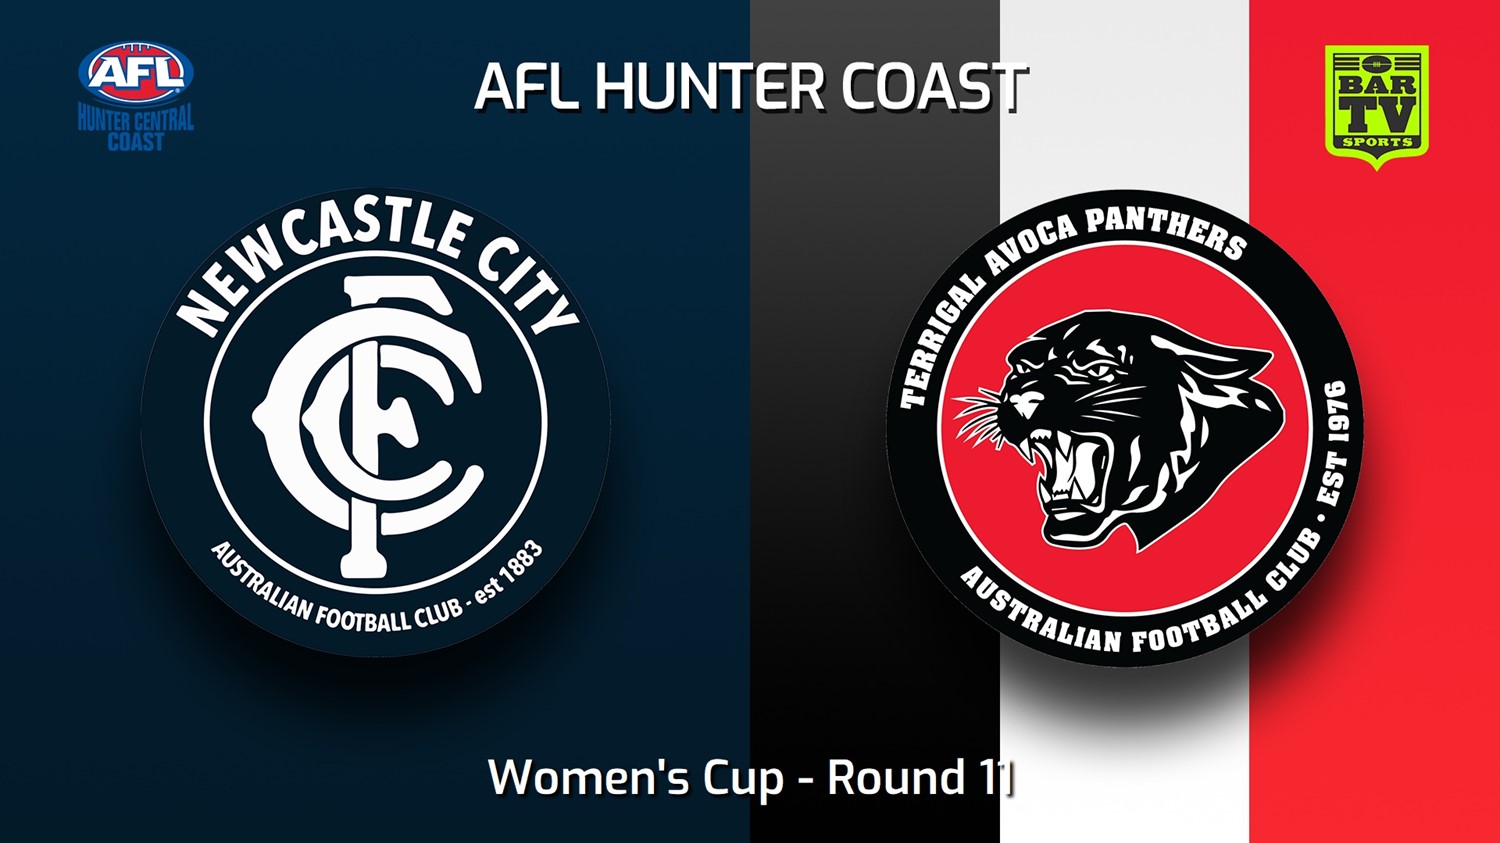 230708-AFL Hunter Central Coast Round 11 - Women's Cup - Newcastle City  v Terrigal Avoca Panthers Minigame Slate Image